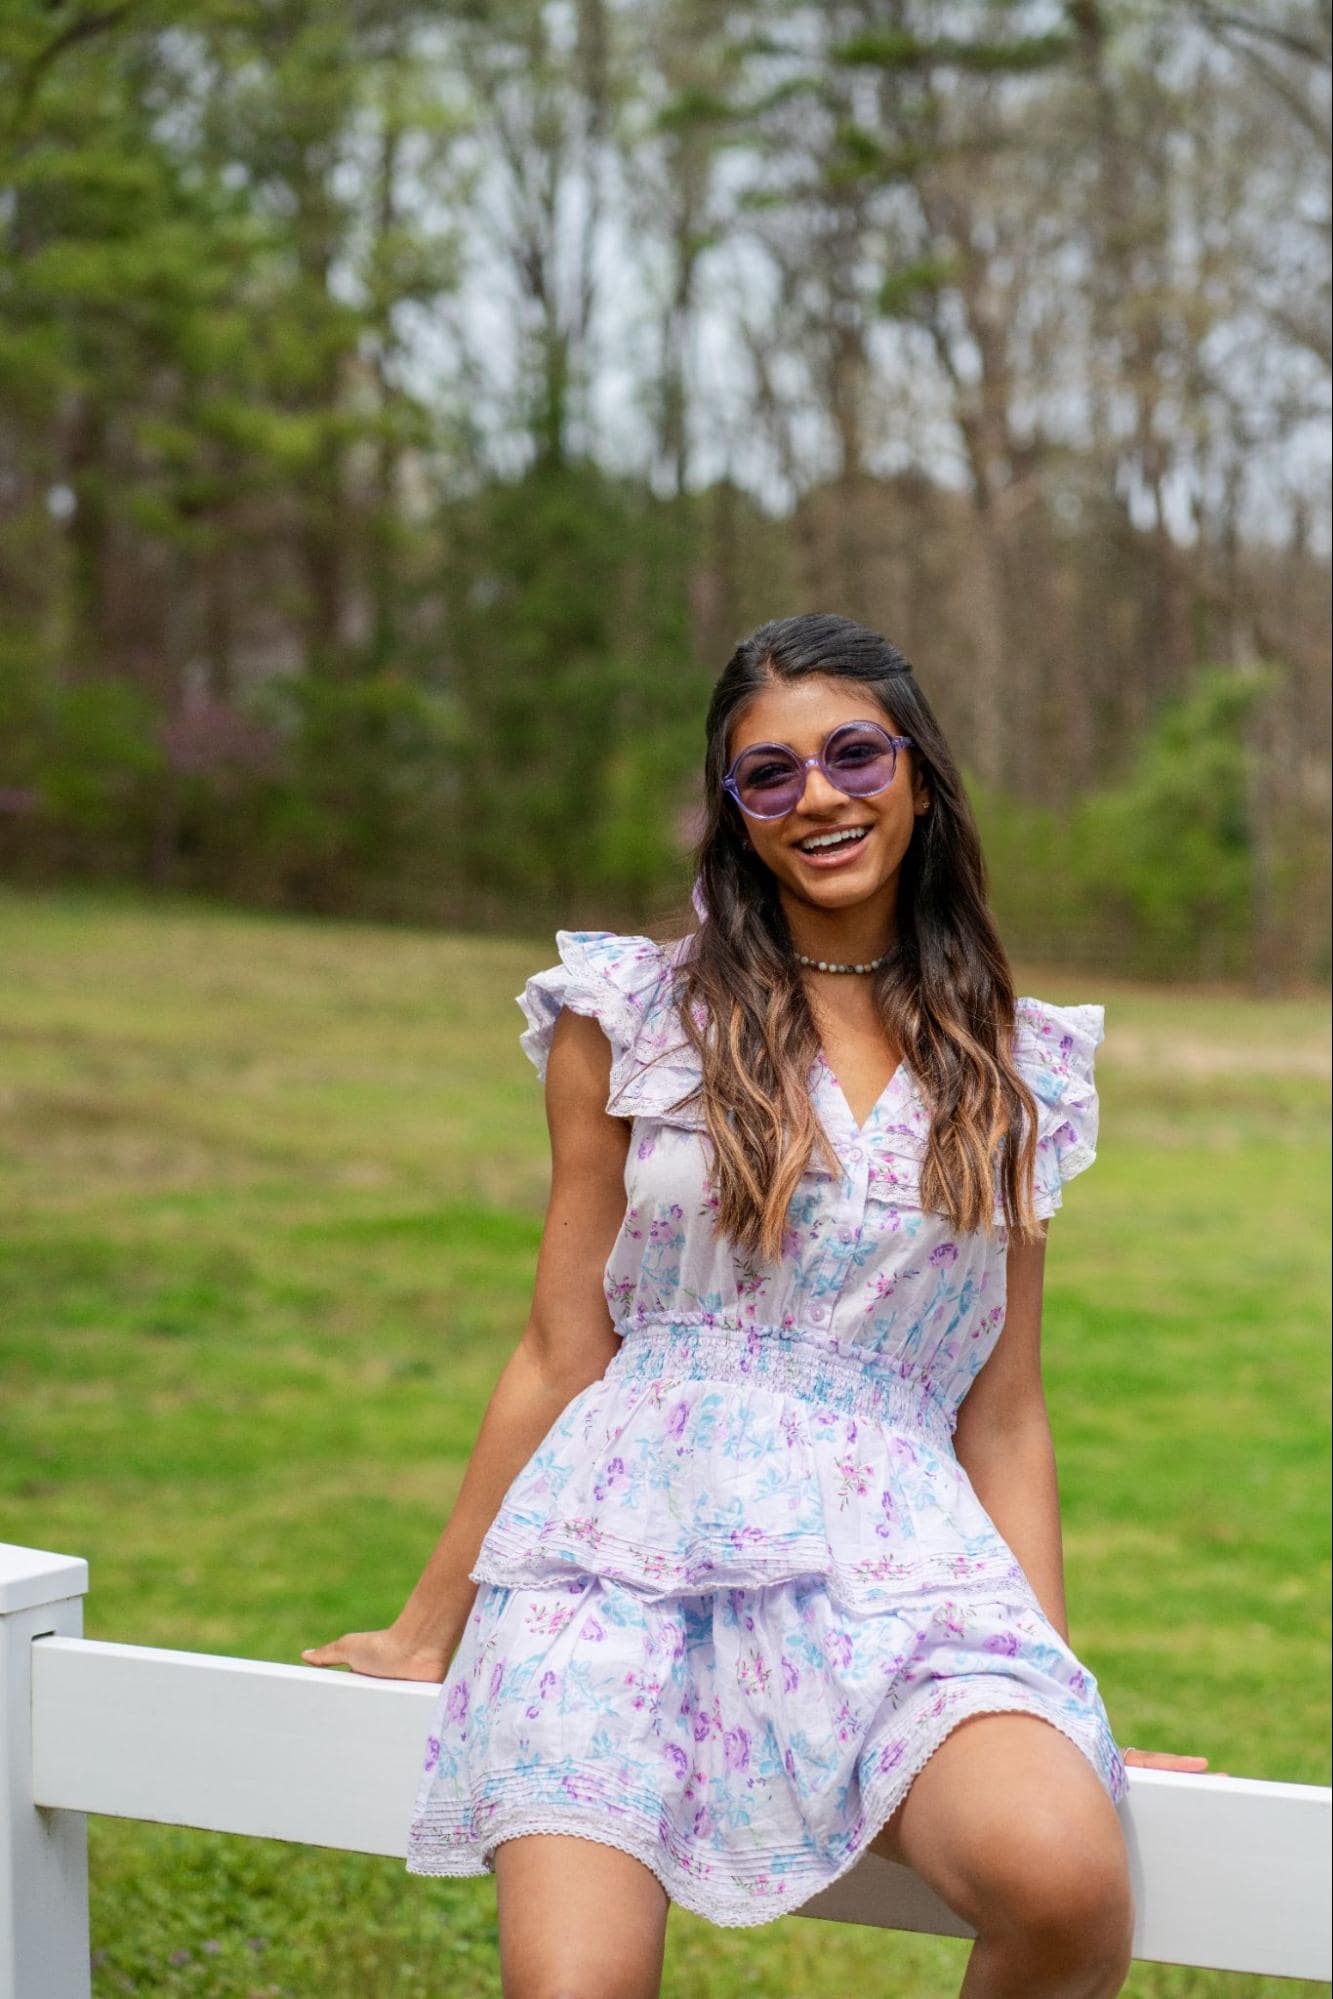 Person half-sitting on fence in floral dress